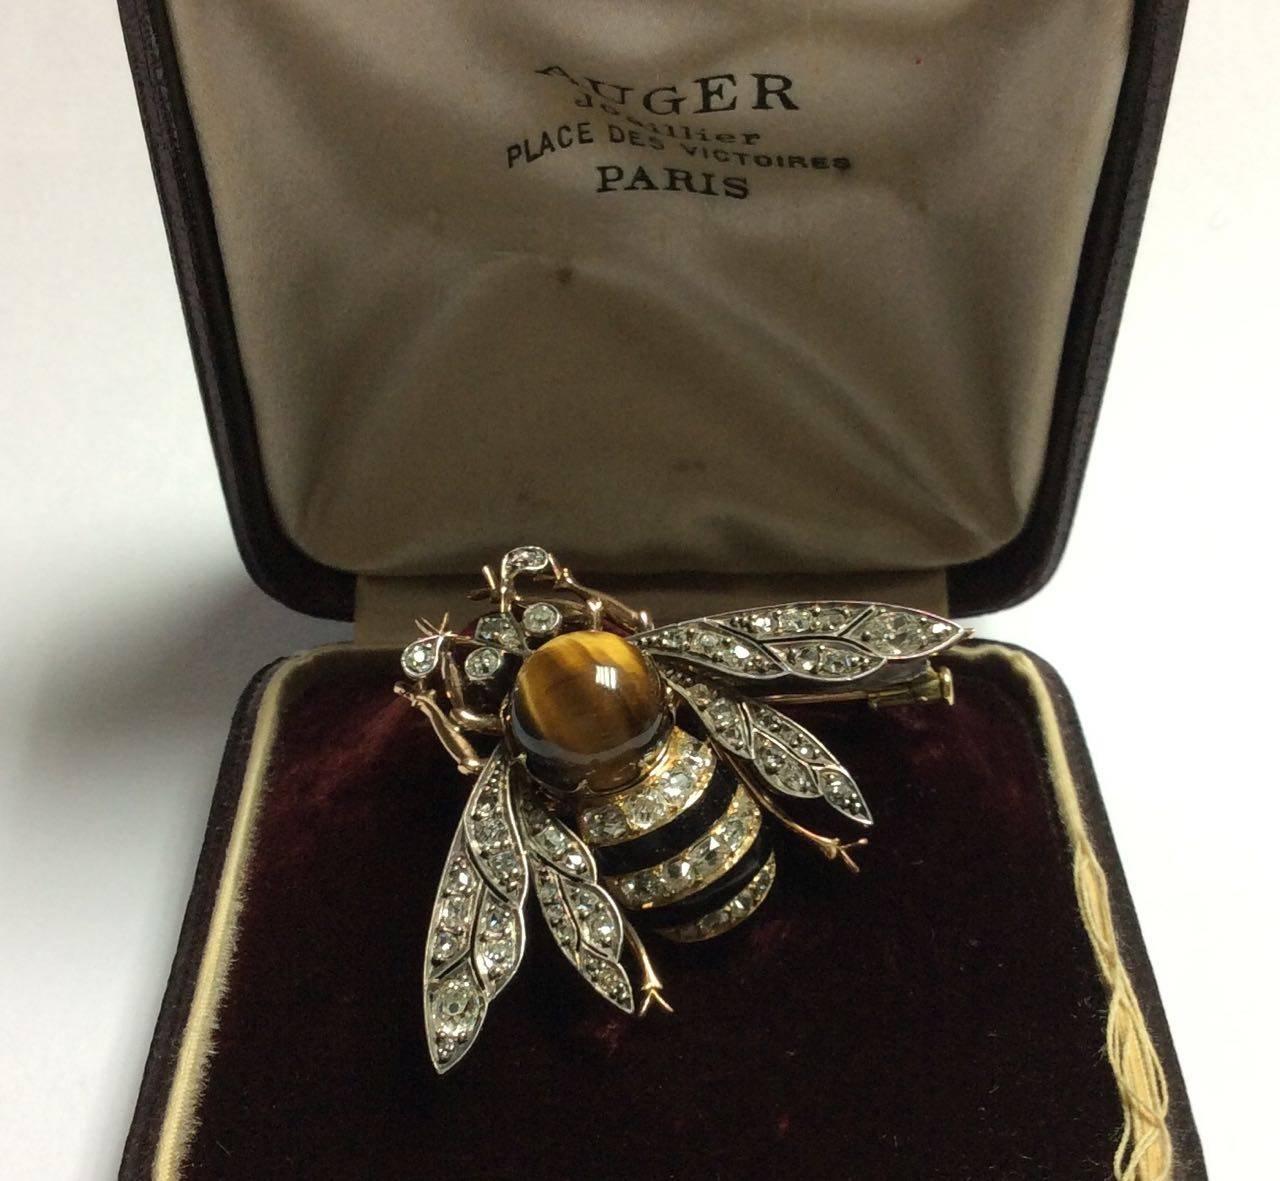 Enameled Bee brooch in silver & gold, diamonds, quartz Tiger's eye. With original box by AUGER Paris, 